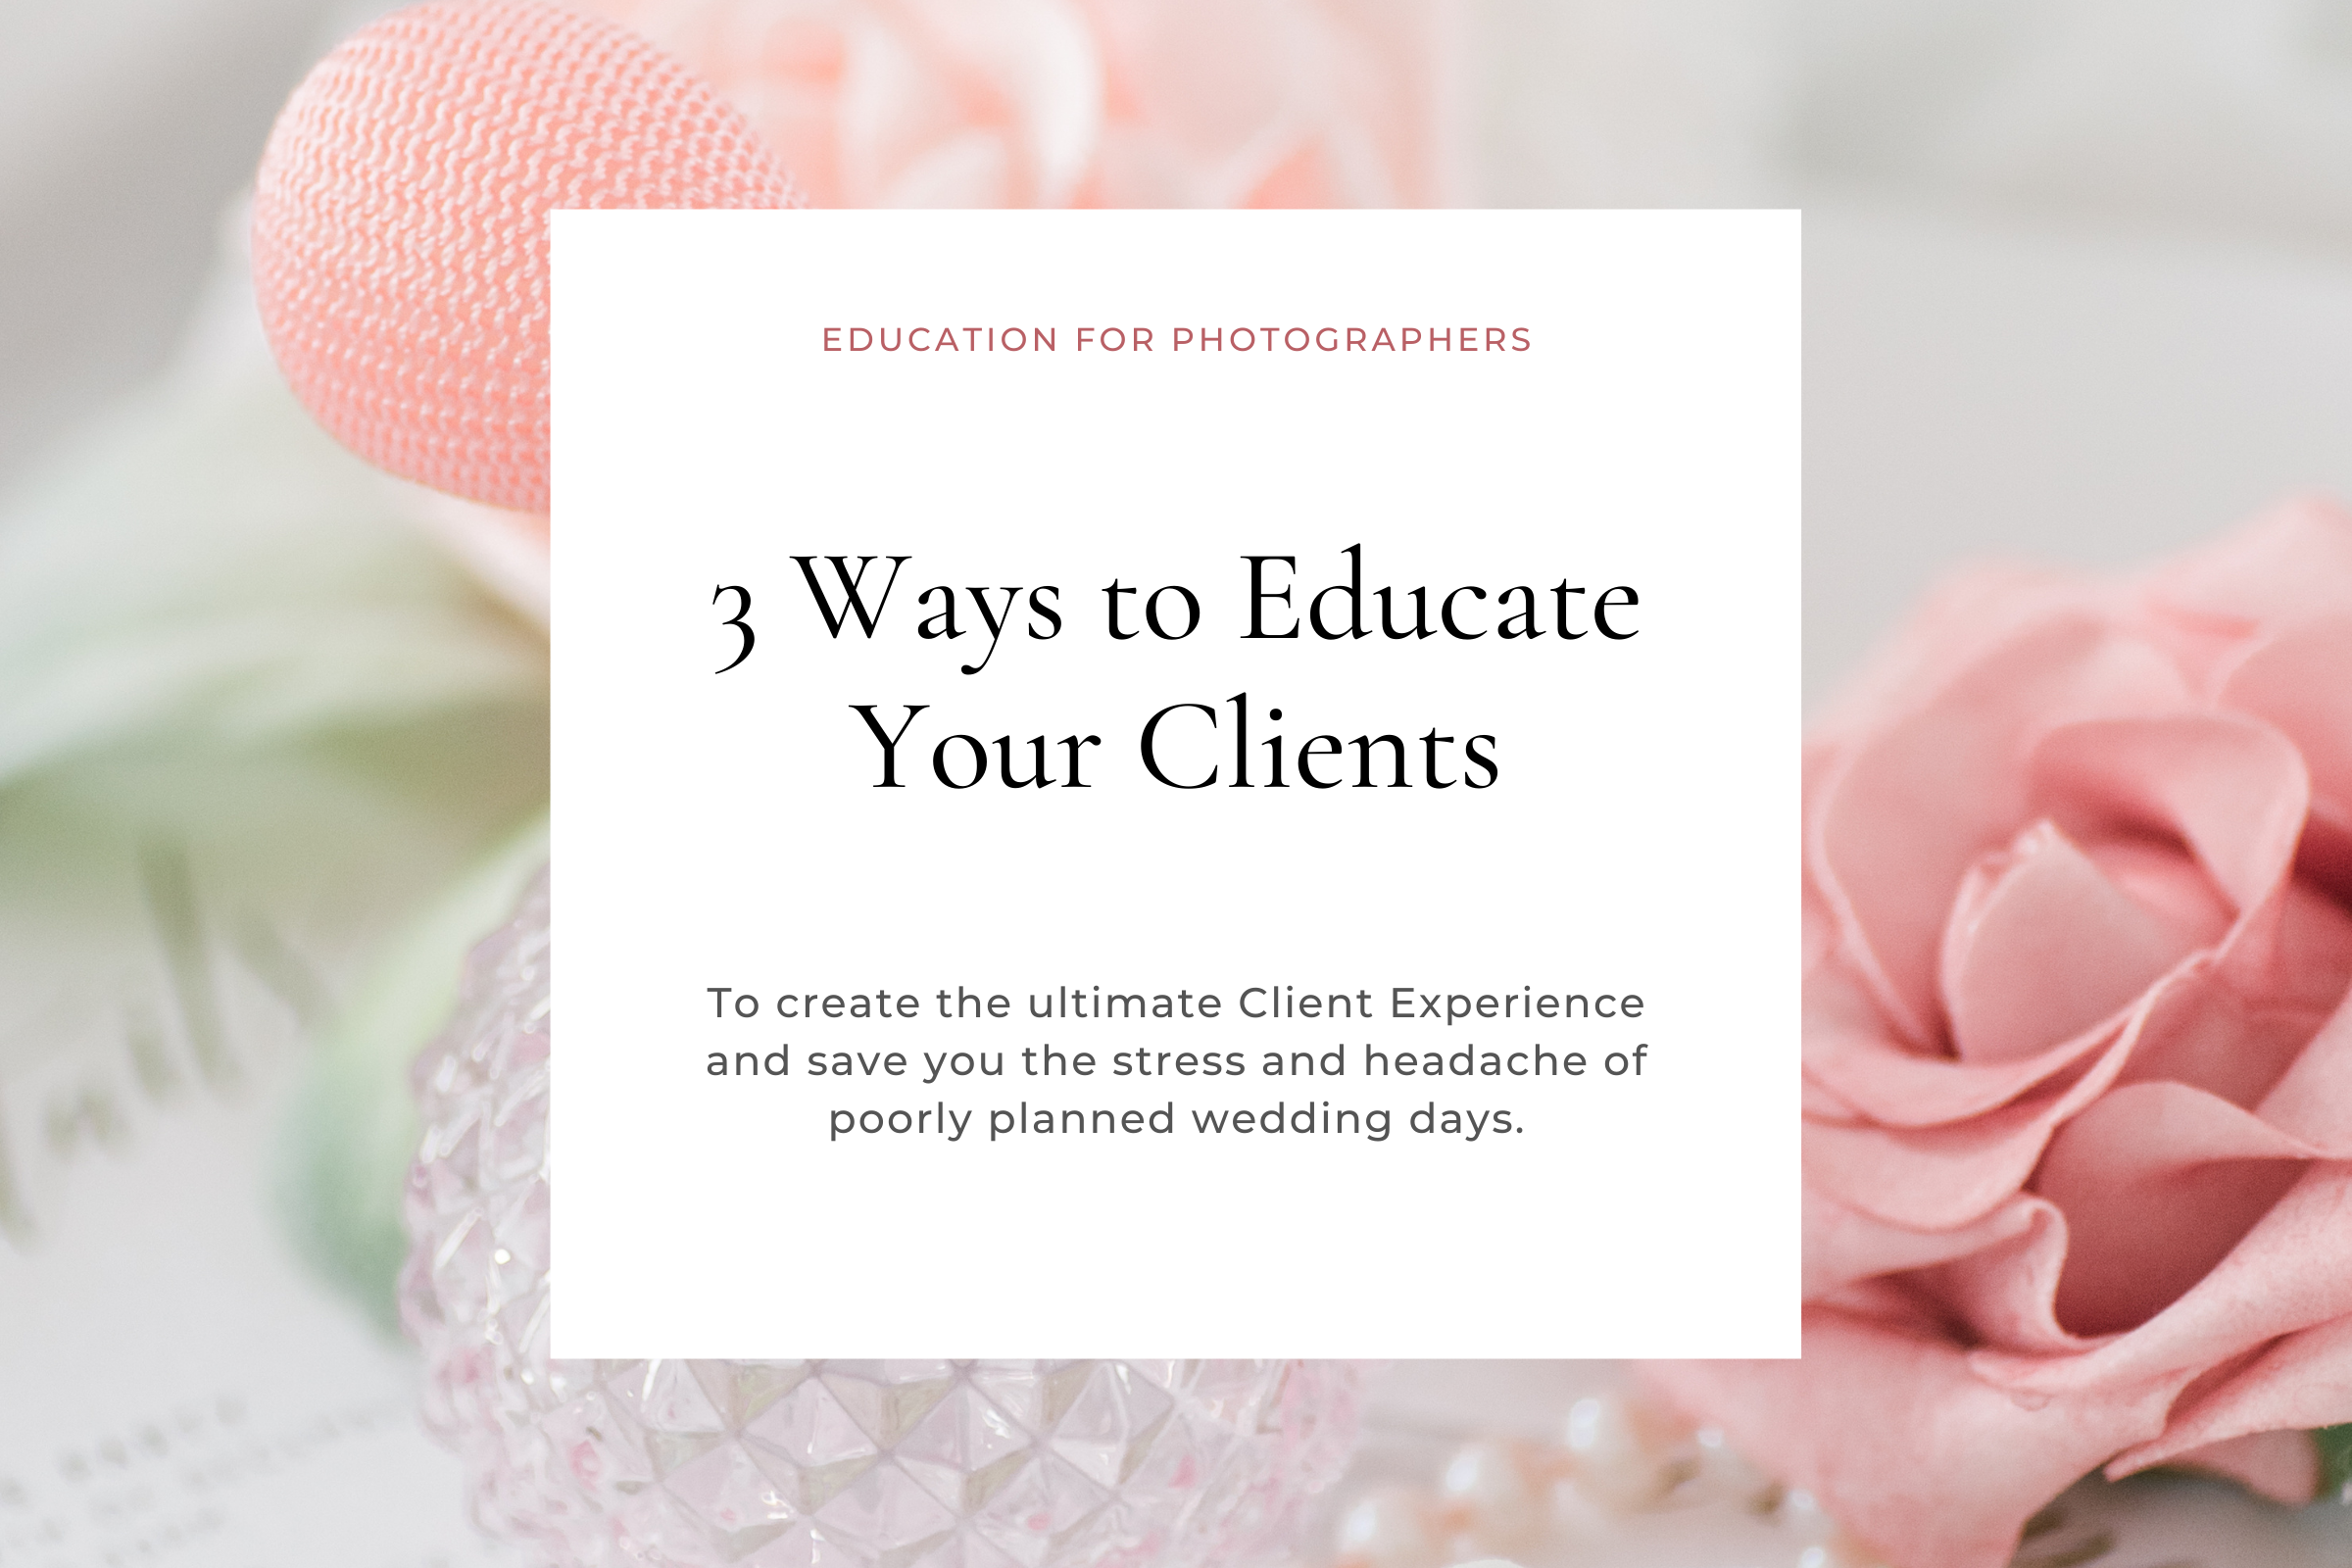 Client Experience Tips - Educate Your Clients | Photographer Education, Client Experience, Website and SEO Education for Wedding Photographers